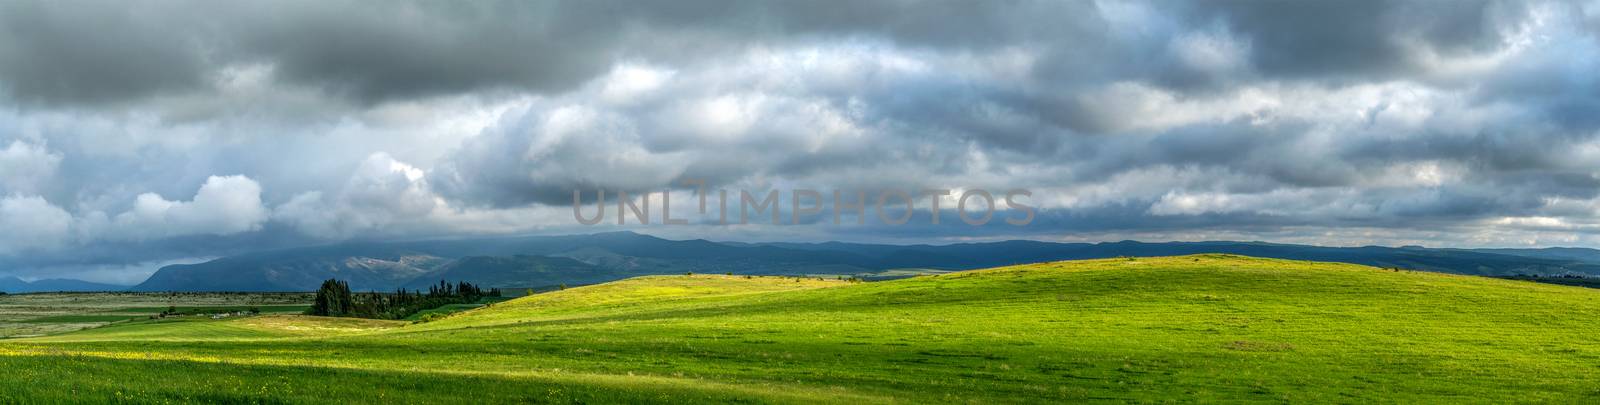 pasture on a mountain plateau by fogen